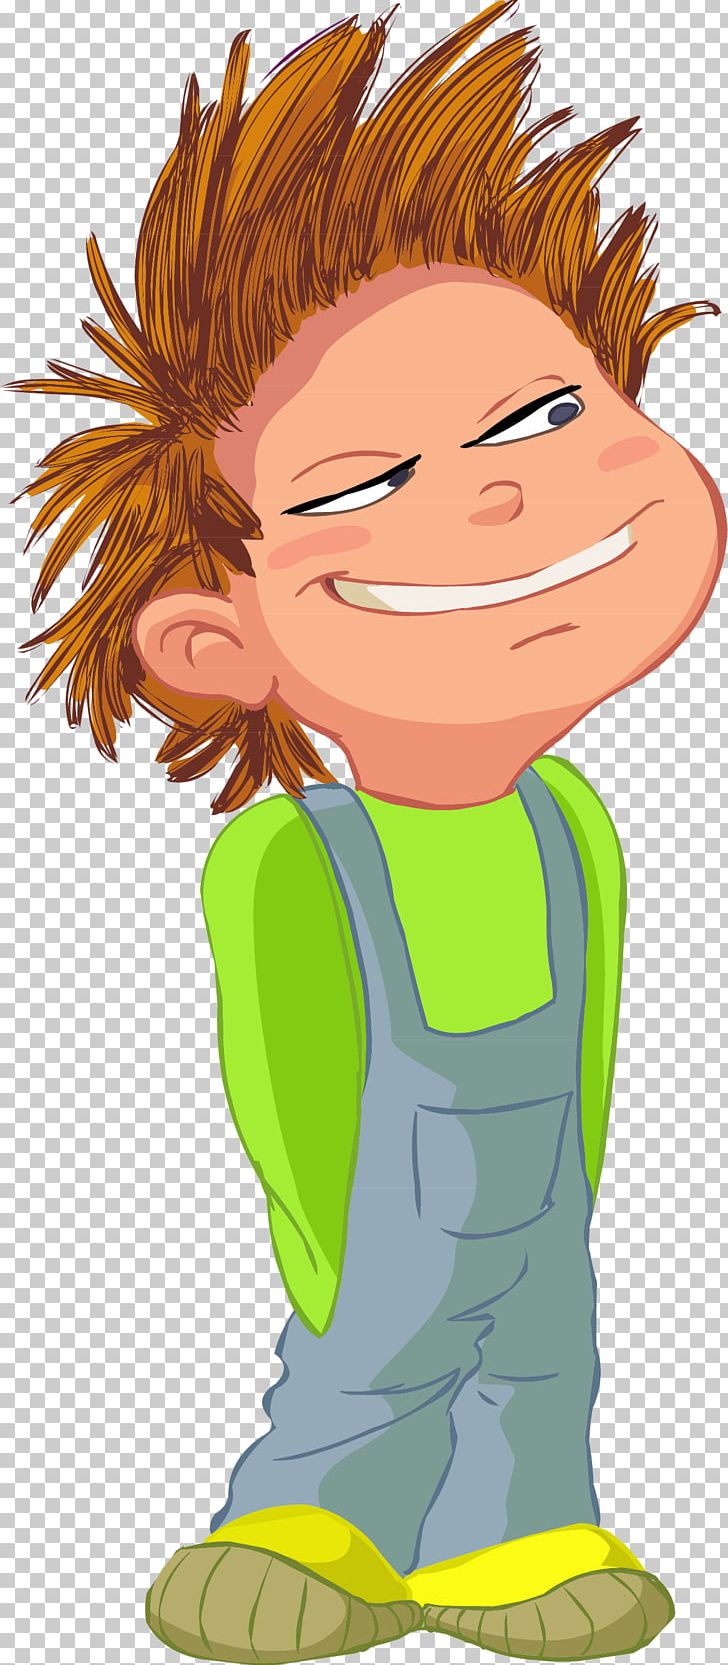 Face Facial Expression Hair Smile PNG, Clipart, Anime, Art, Boy, Brown Hair, Cartoon Free PNG Download